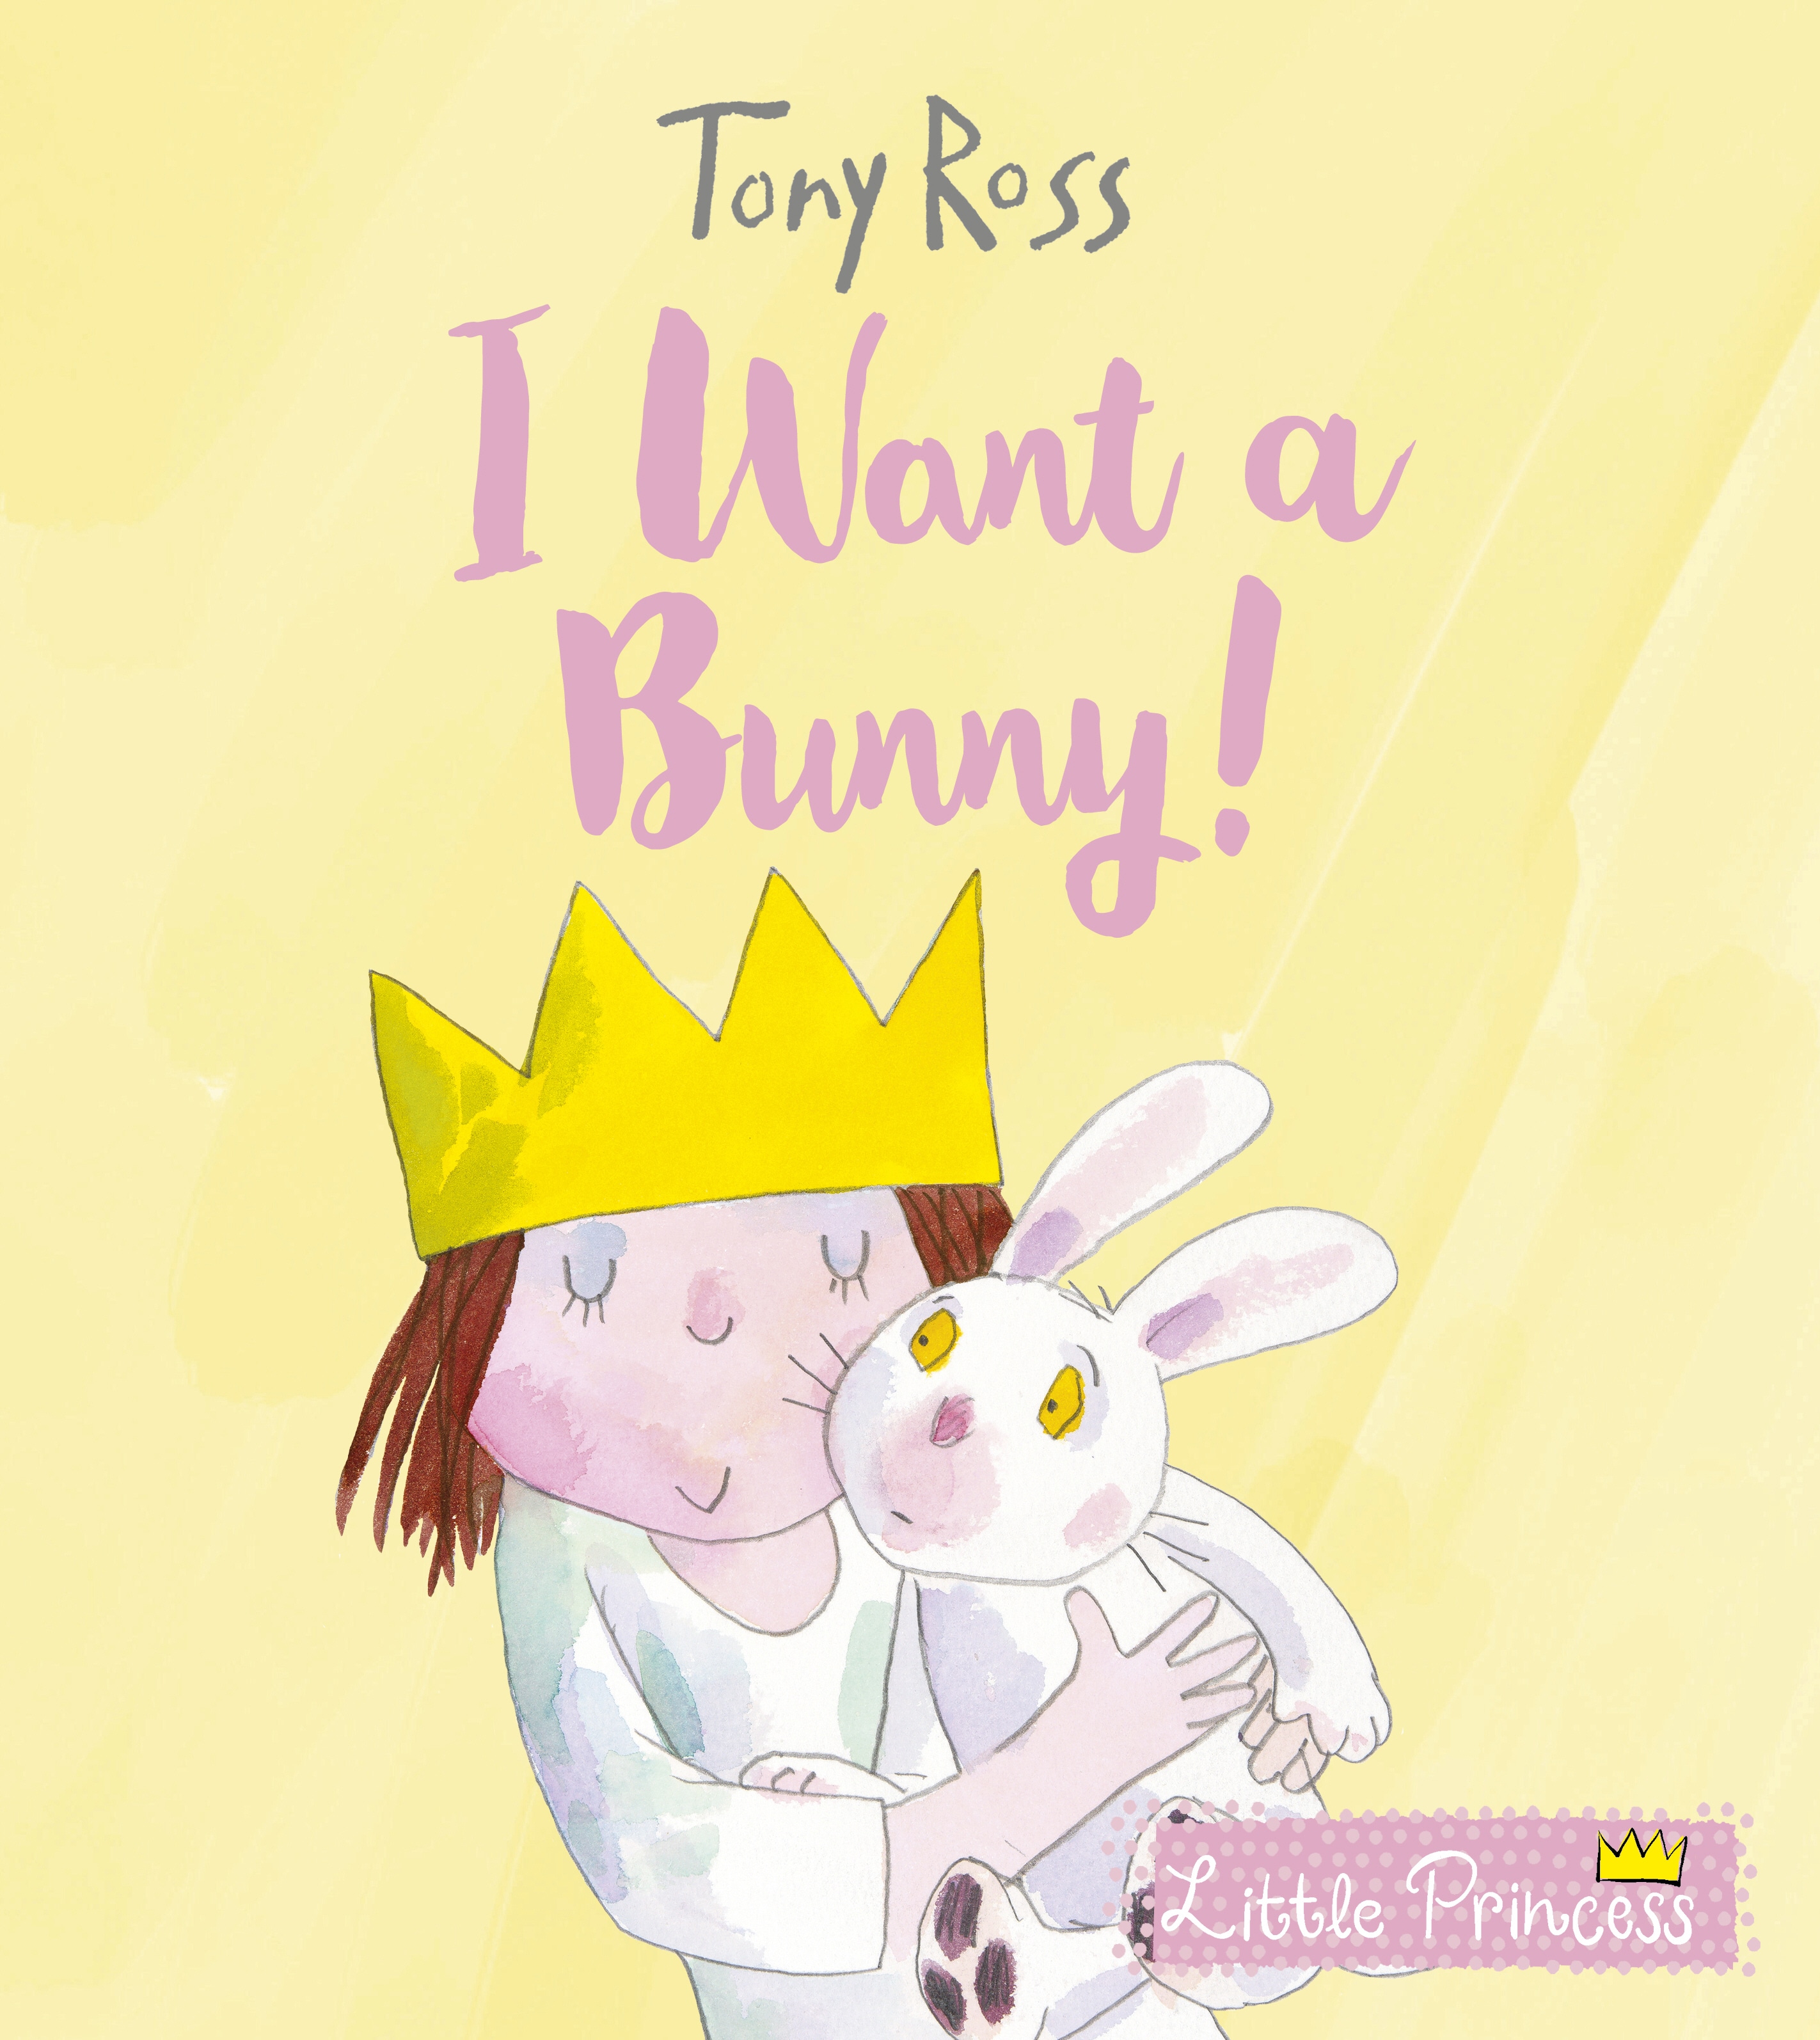 Book “I Want a Bunny!” by Tony Ross — March 7, 2019